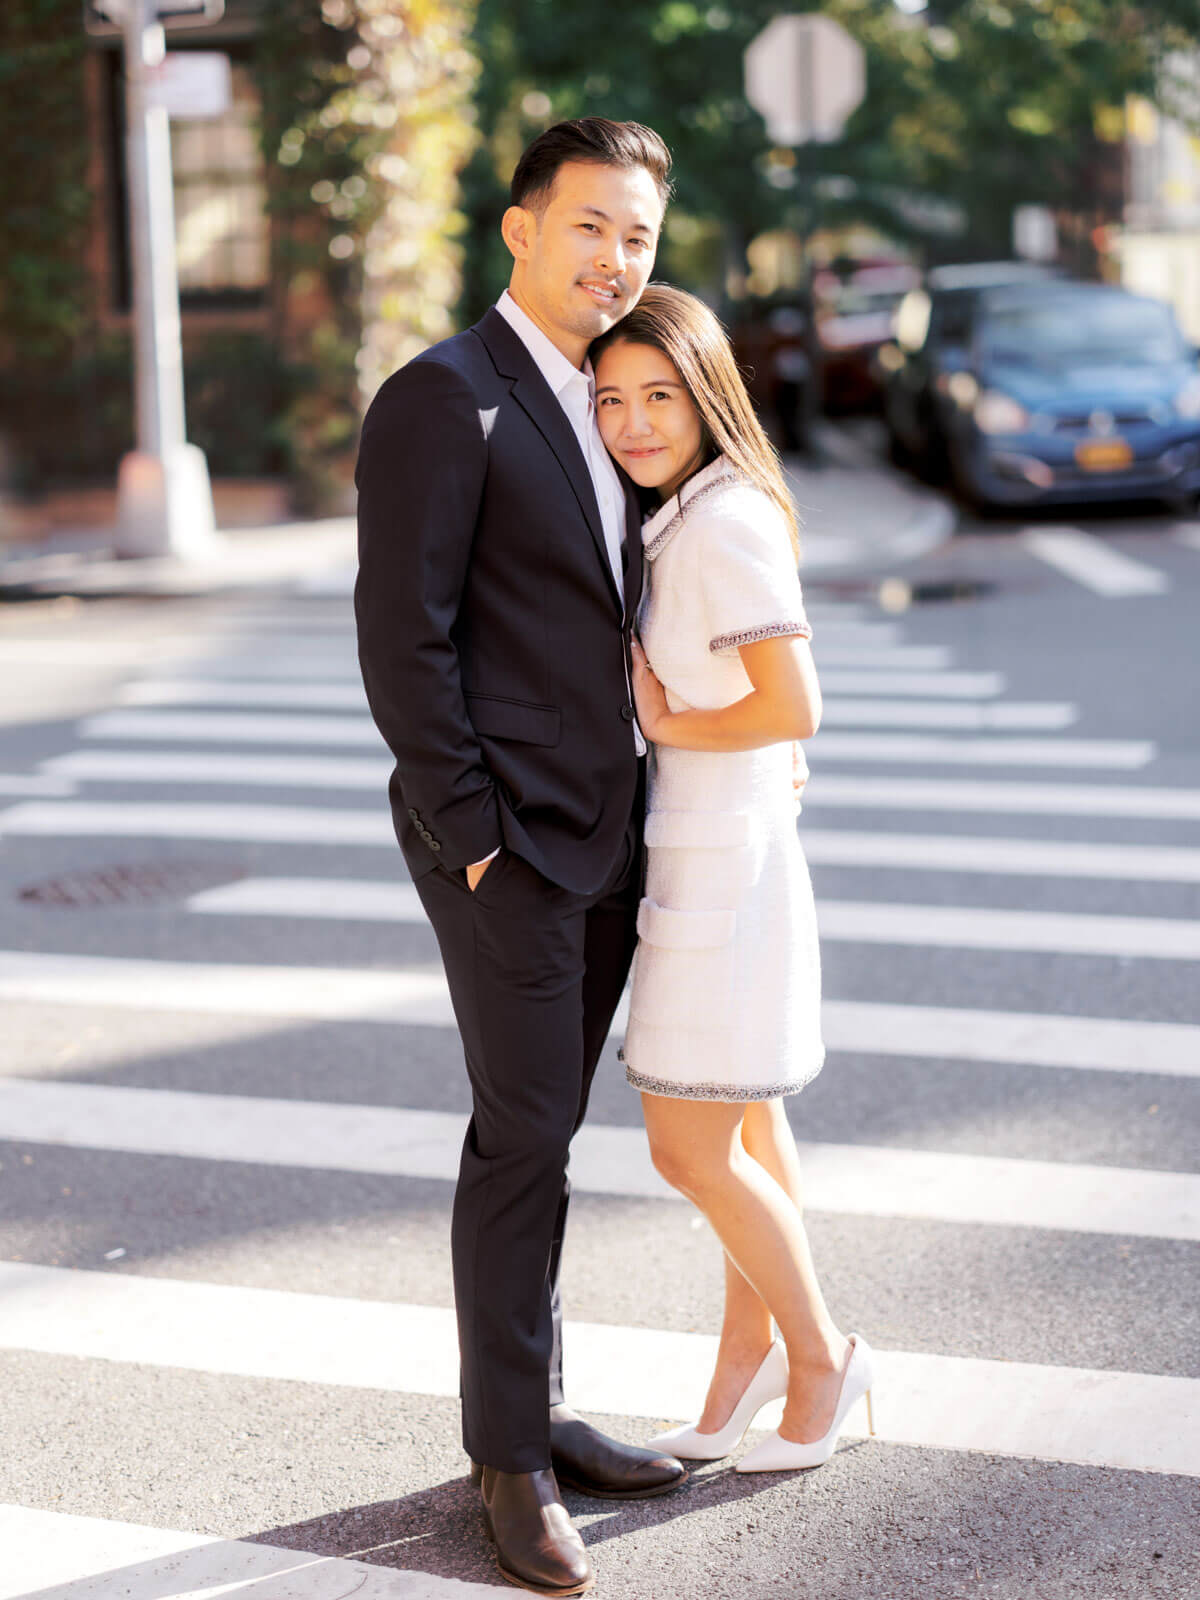 The engaged couple is in the middle of a pedestrian lane at West Village, NYC. Image by Jenny Fu Studio